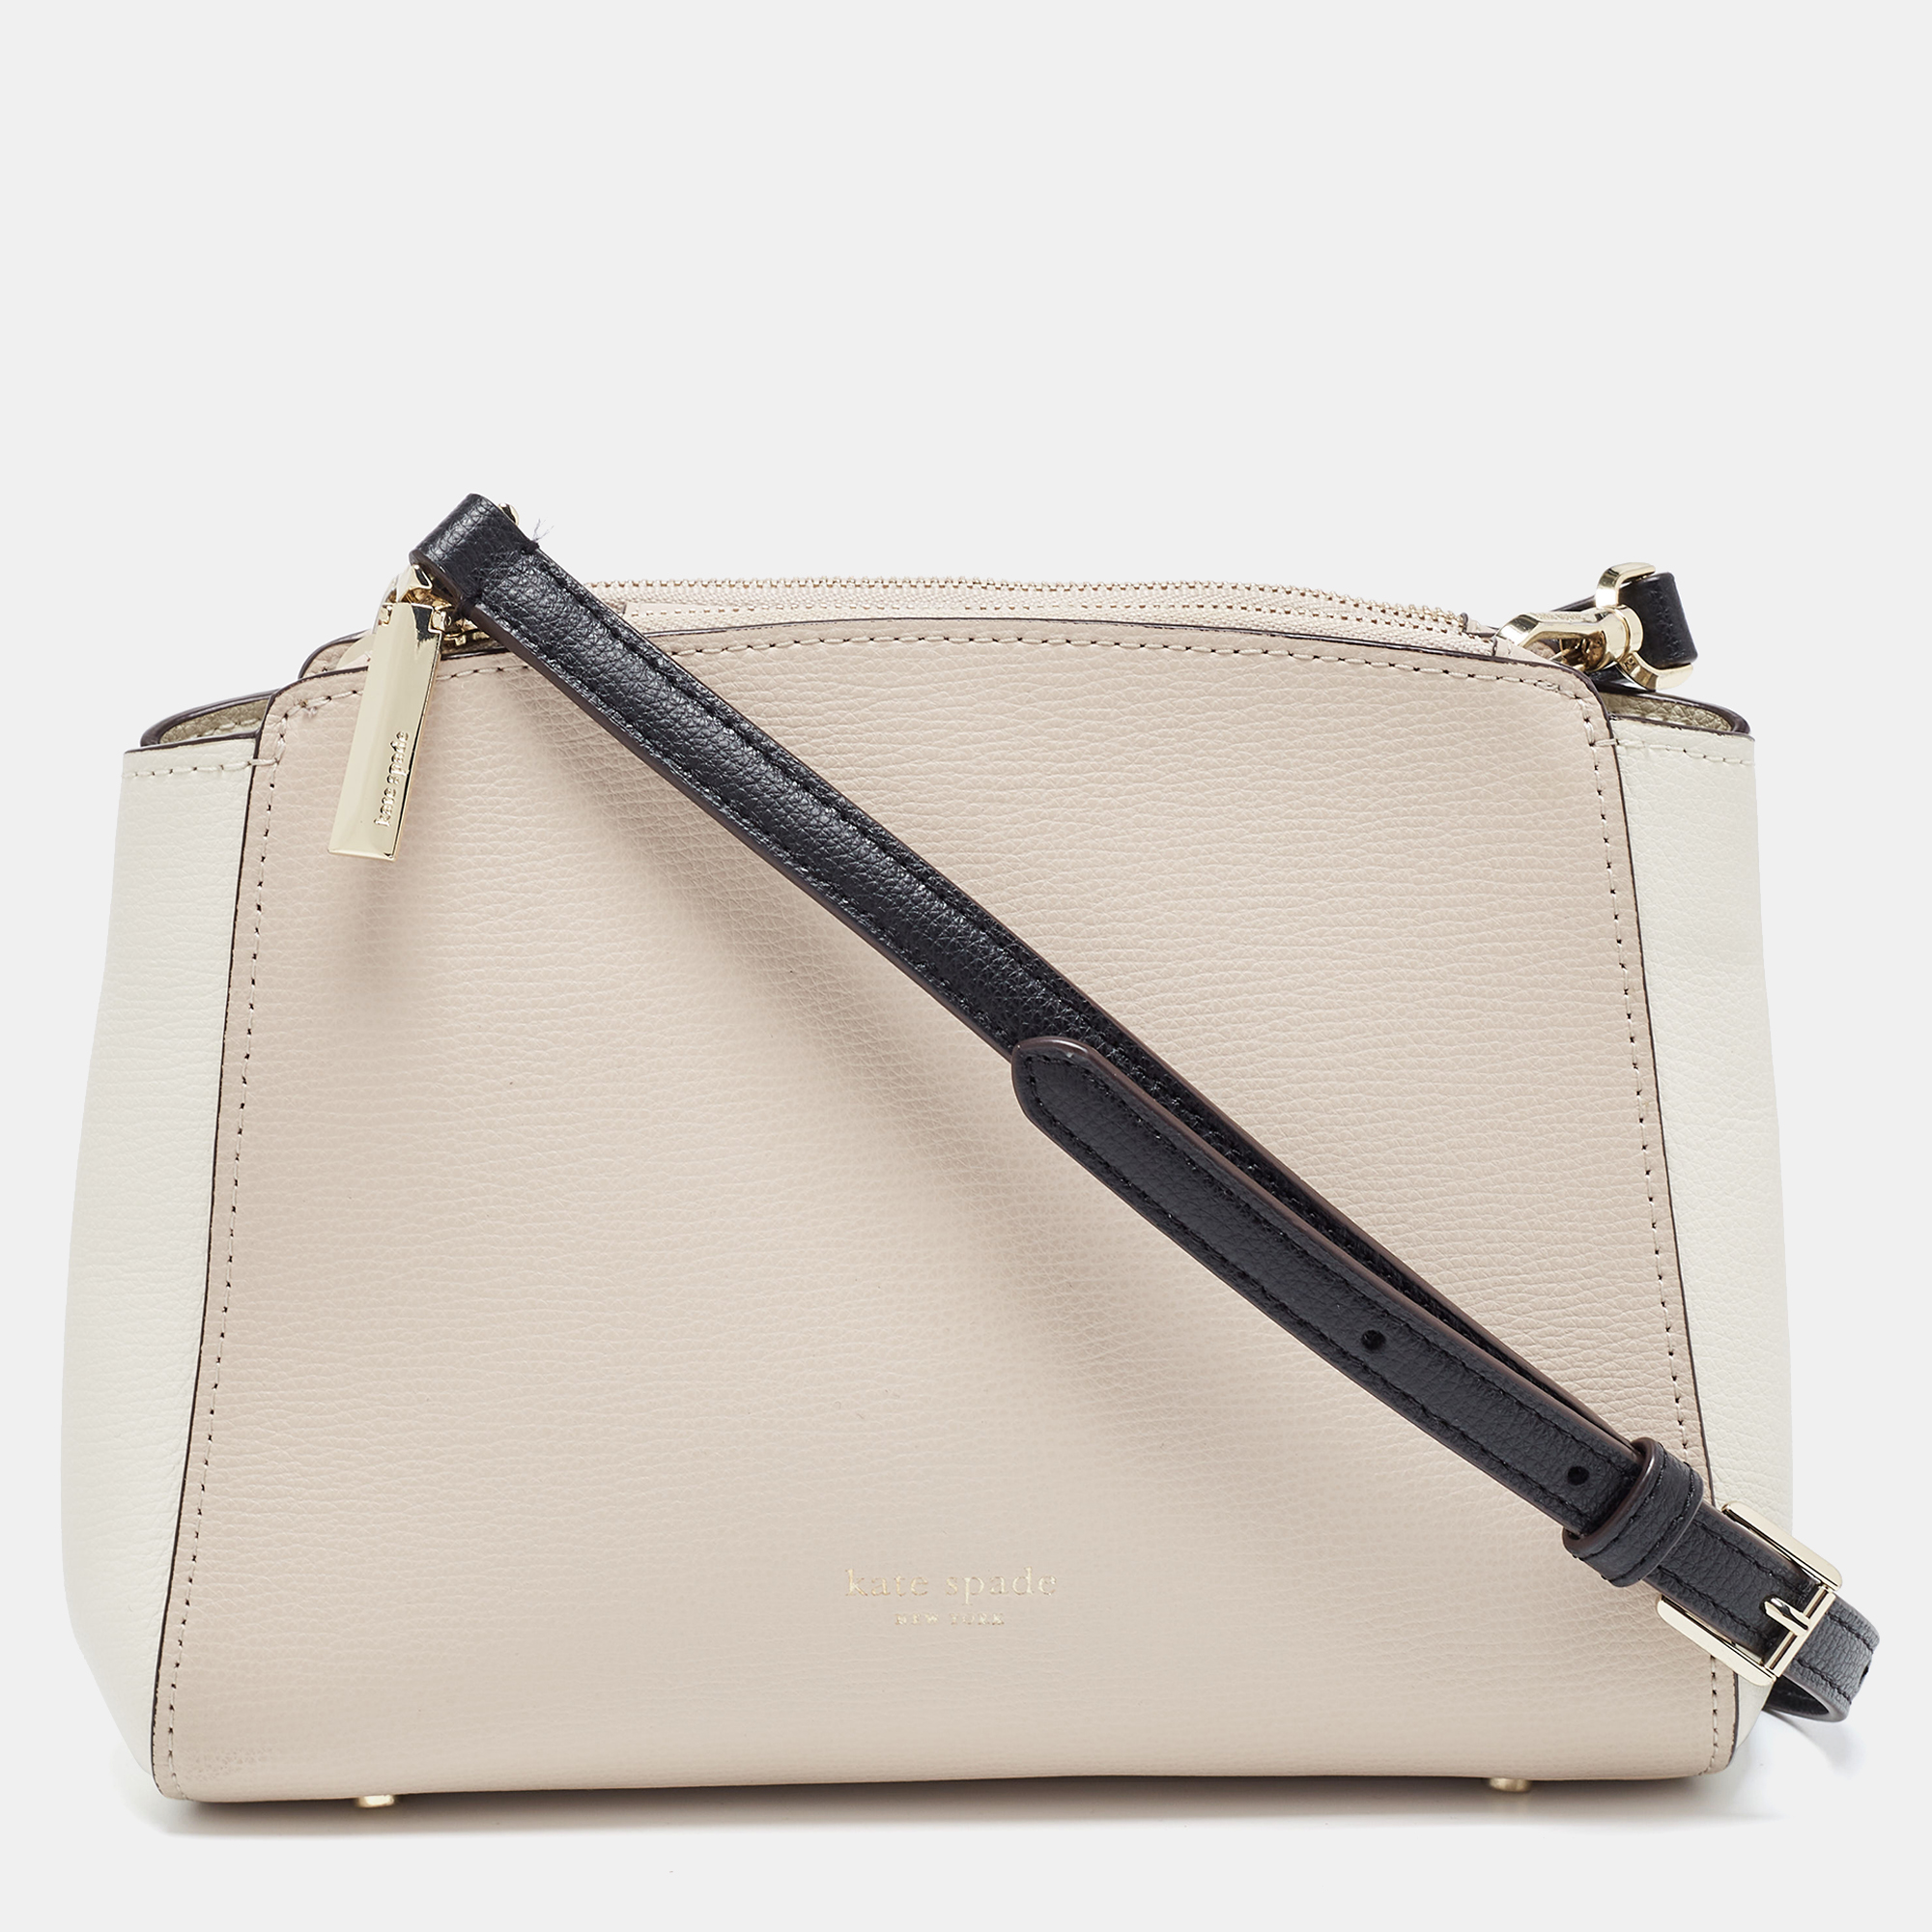 Kate Spade Tri Color Leather Double Zip Crossbody Bag